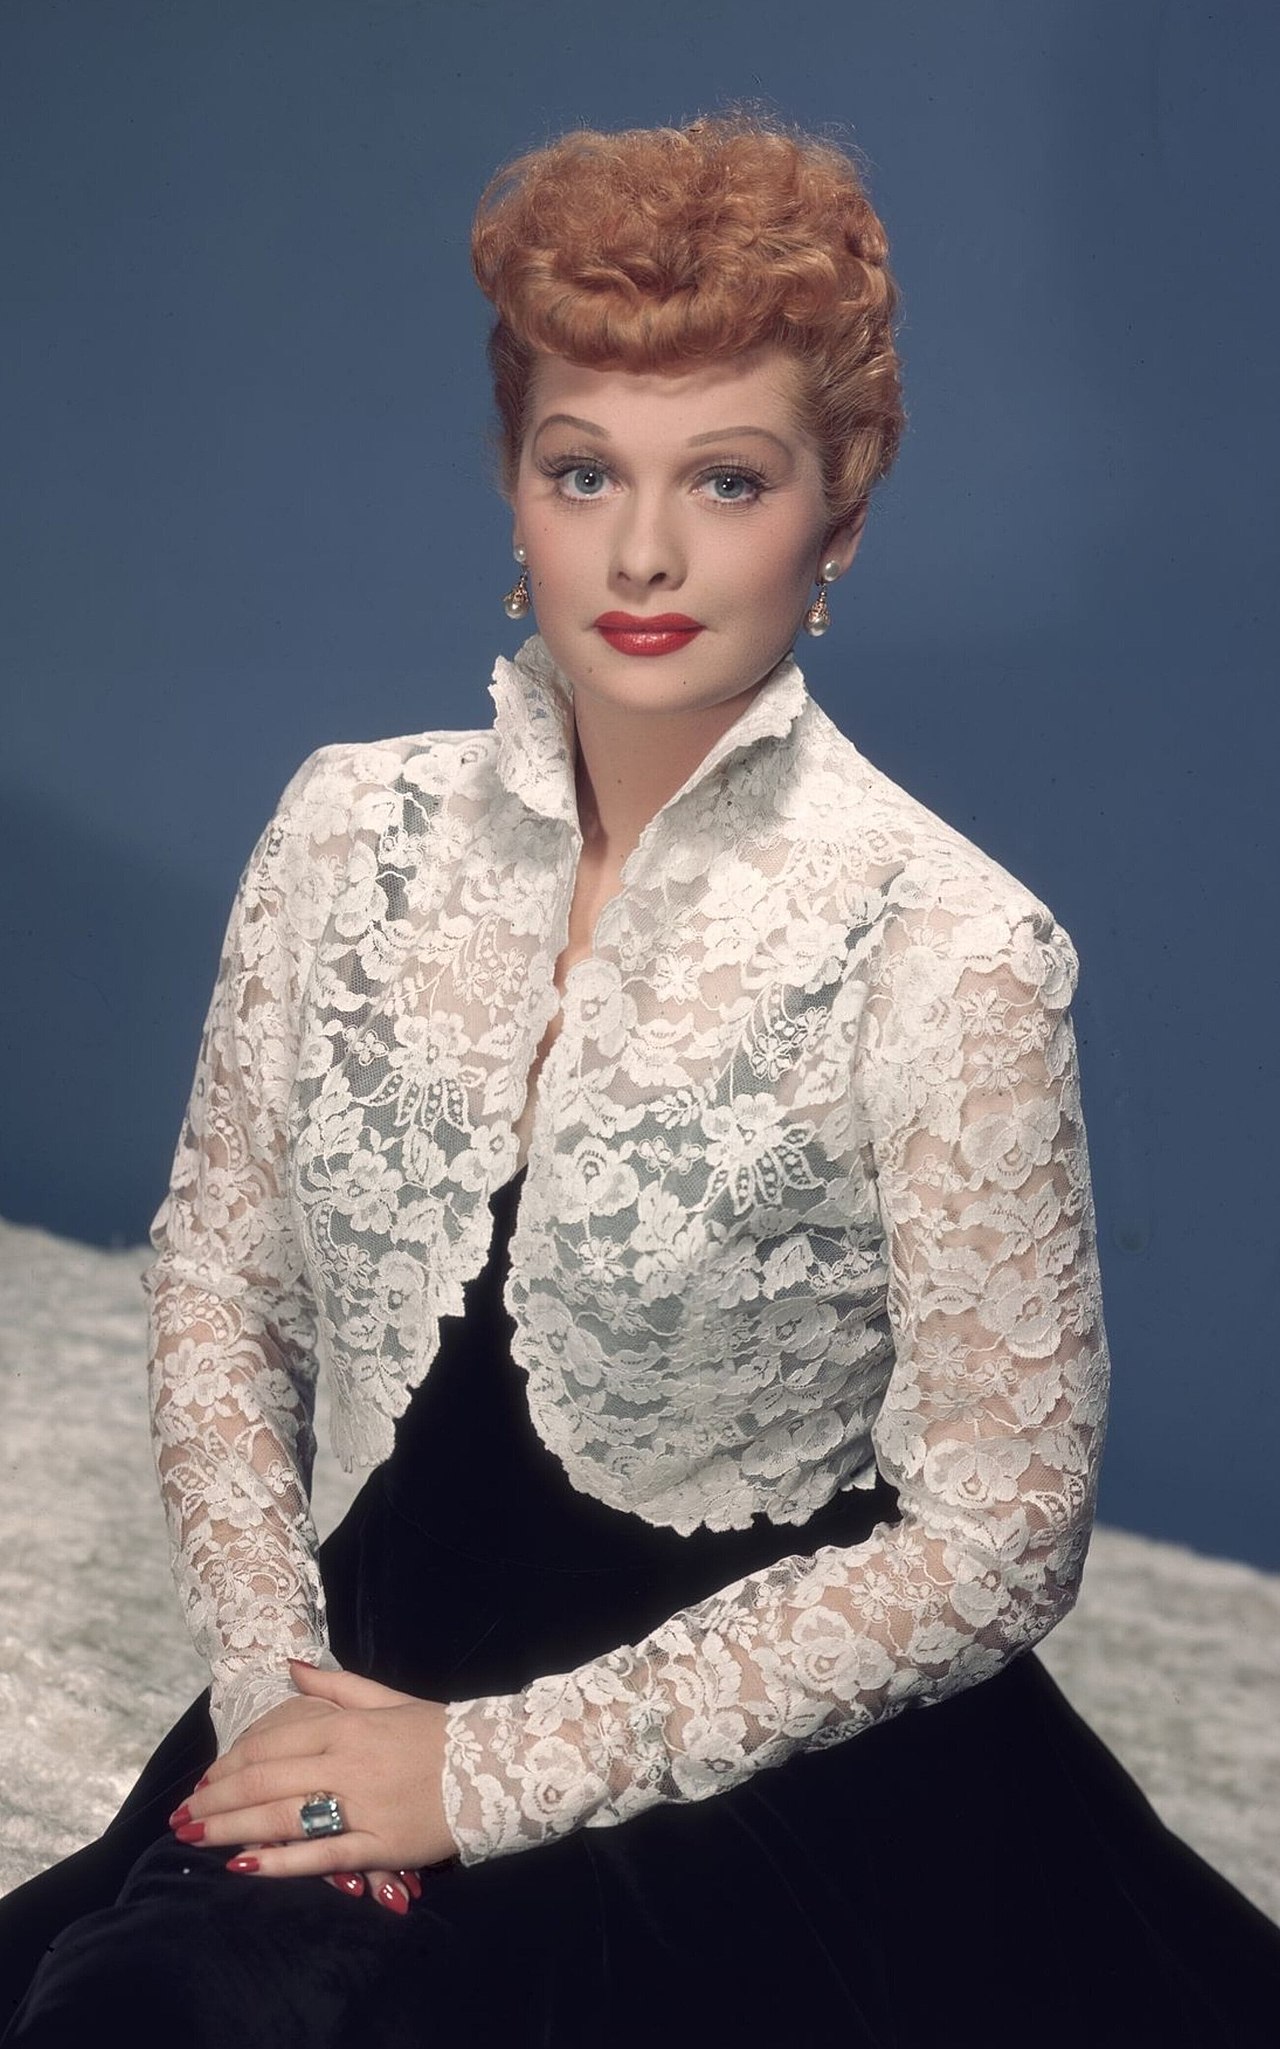 Lucille Ball in a 1955 film still, for I Love Lucy episode "Face to Face", aired on November 14, 1955.